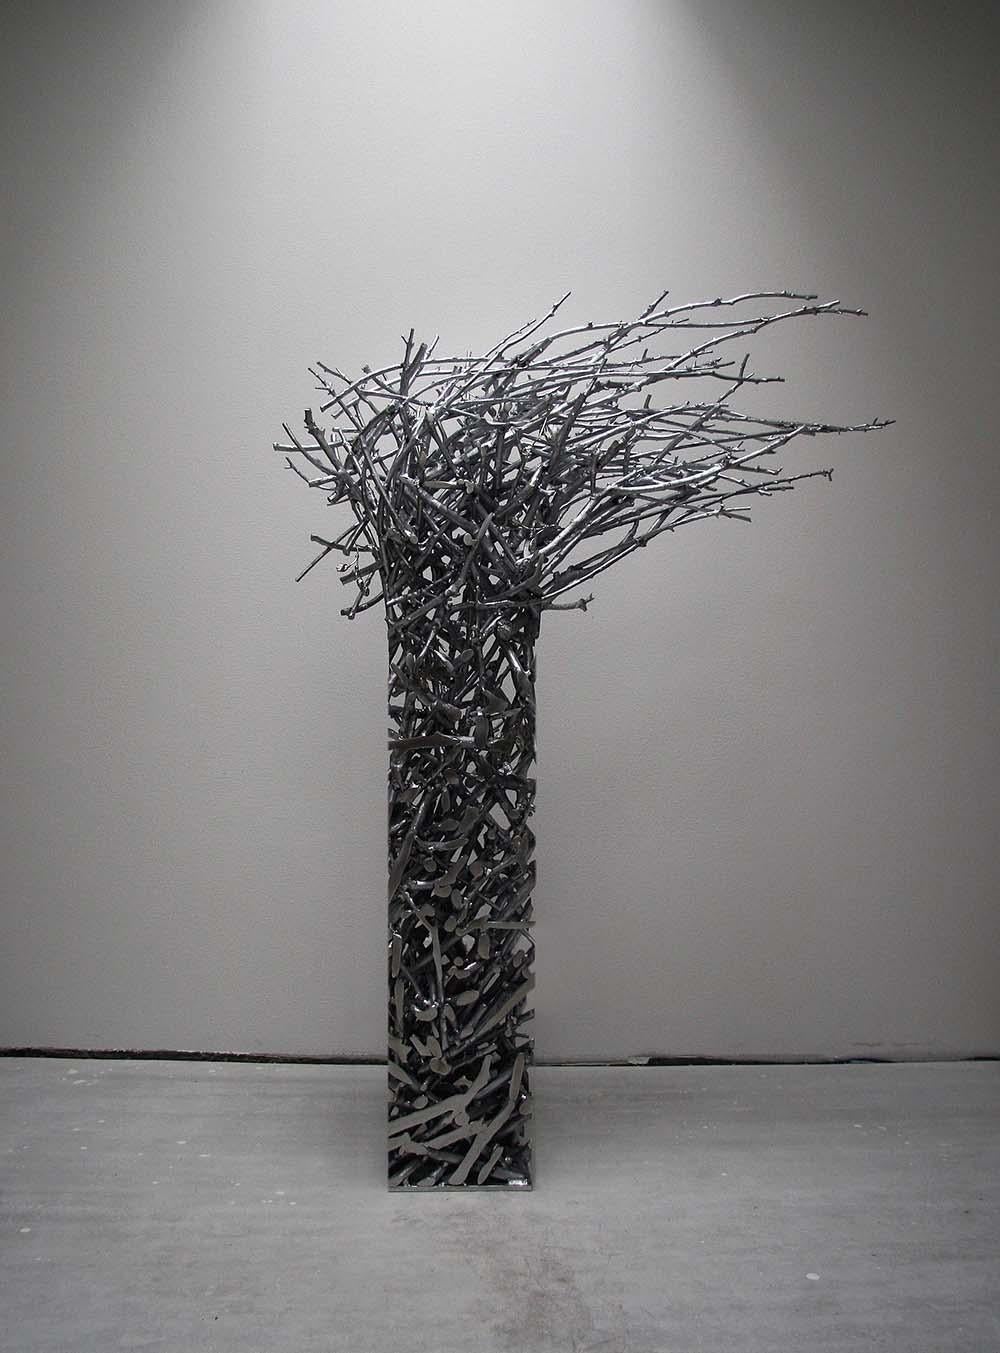 Instant Tree Burja is an aluminium and nickel sculpture by contemporary Czech sculptor Ondřej Oliva, dimensions are 150 × 105 × 30 cm (59.1 × 41.3 × 11.8 in). 
This sculpture is a unique piece signed by the artist and comes with a certificate of